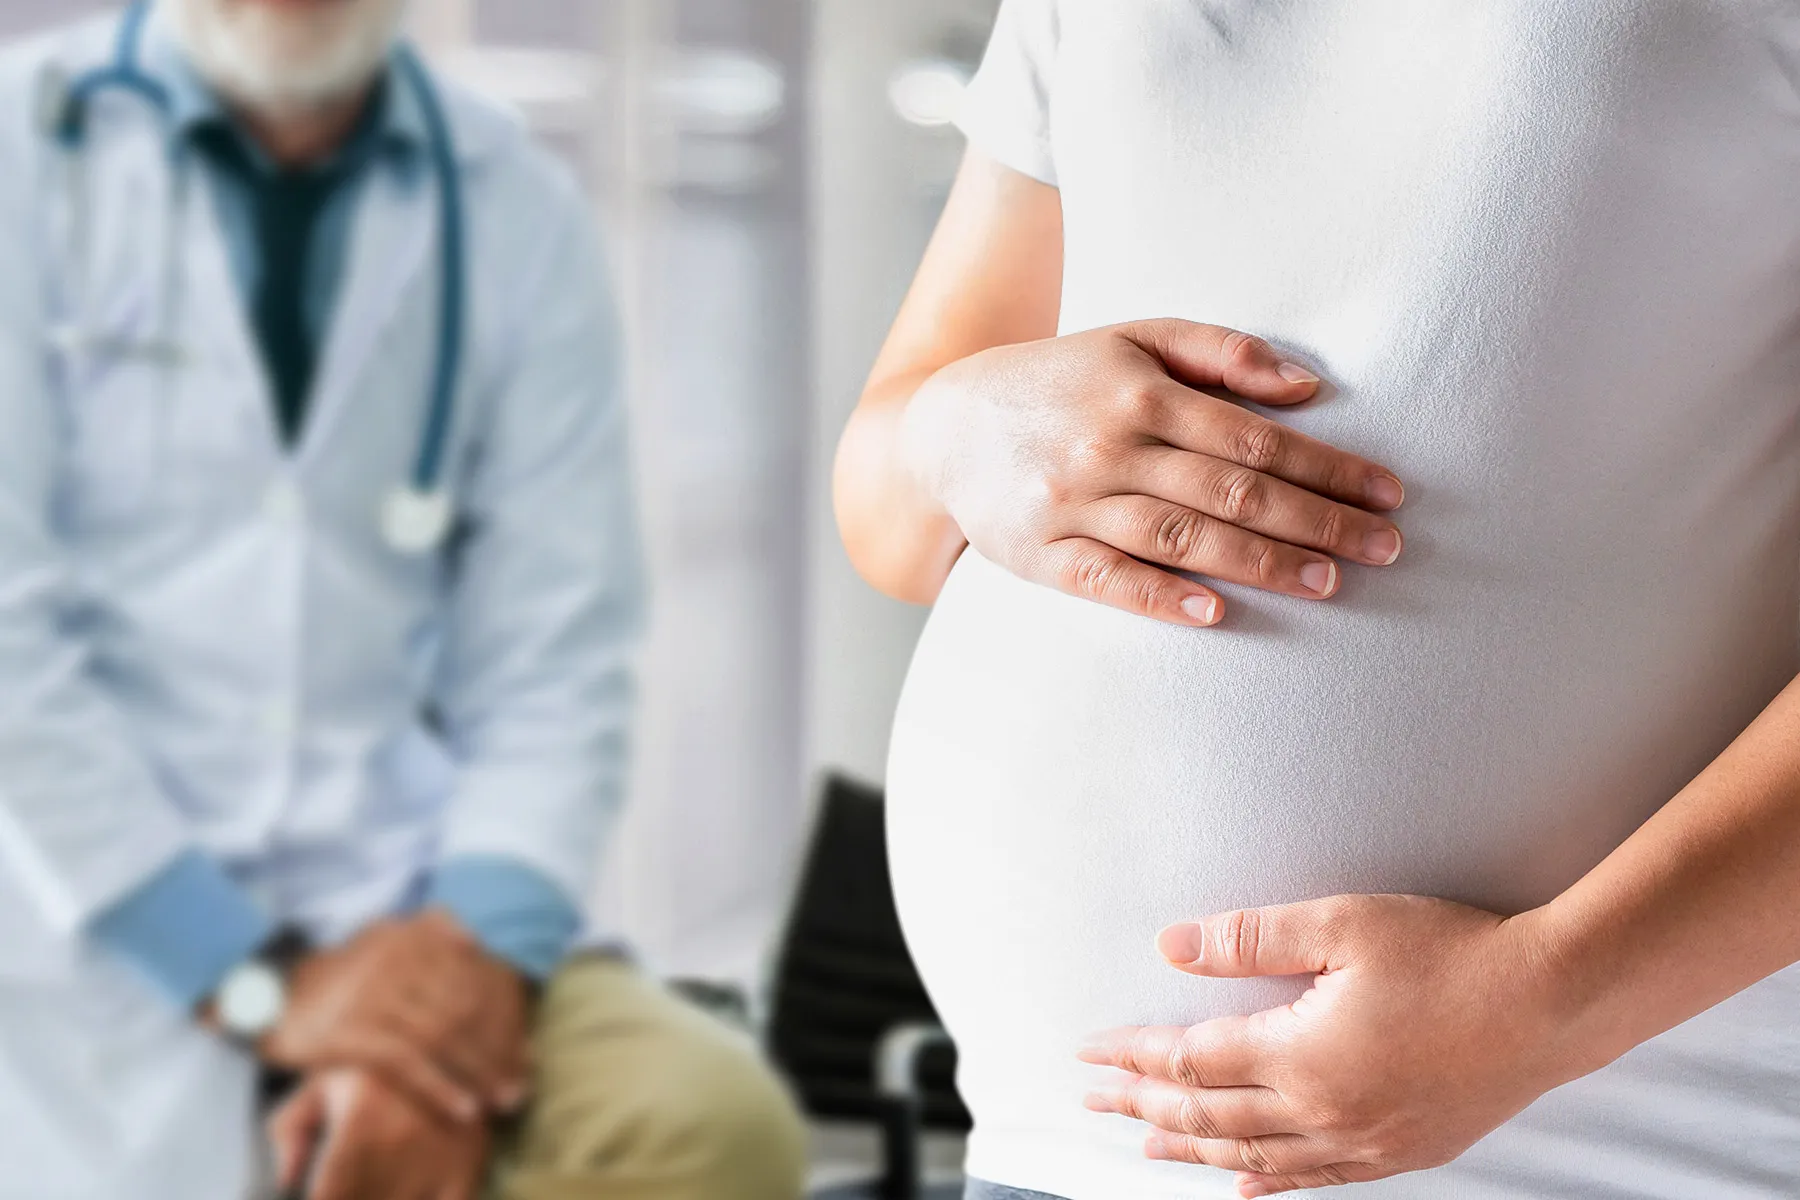 Coronavirus and Pregnancy: What You Should Know